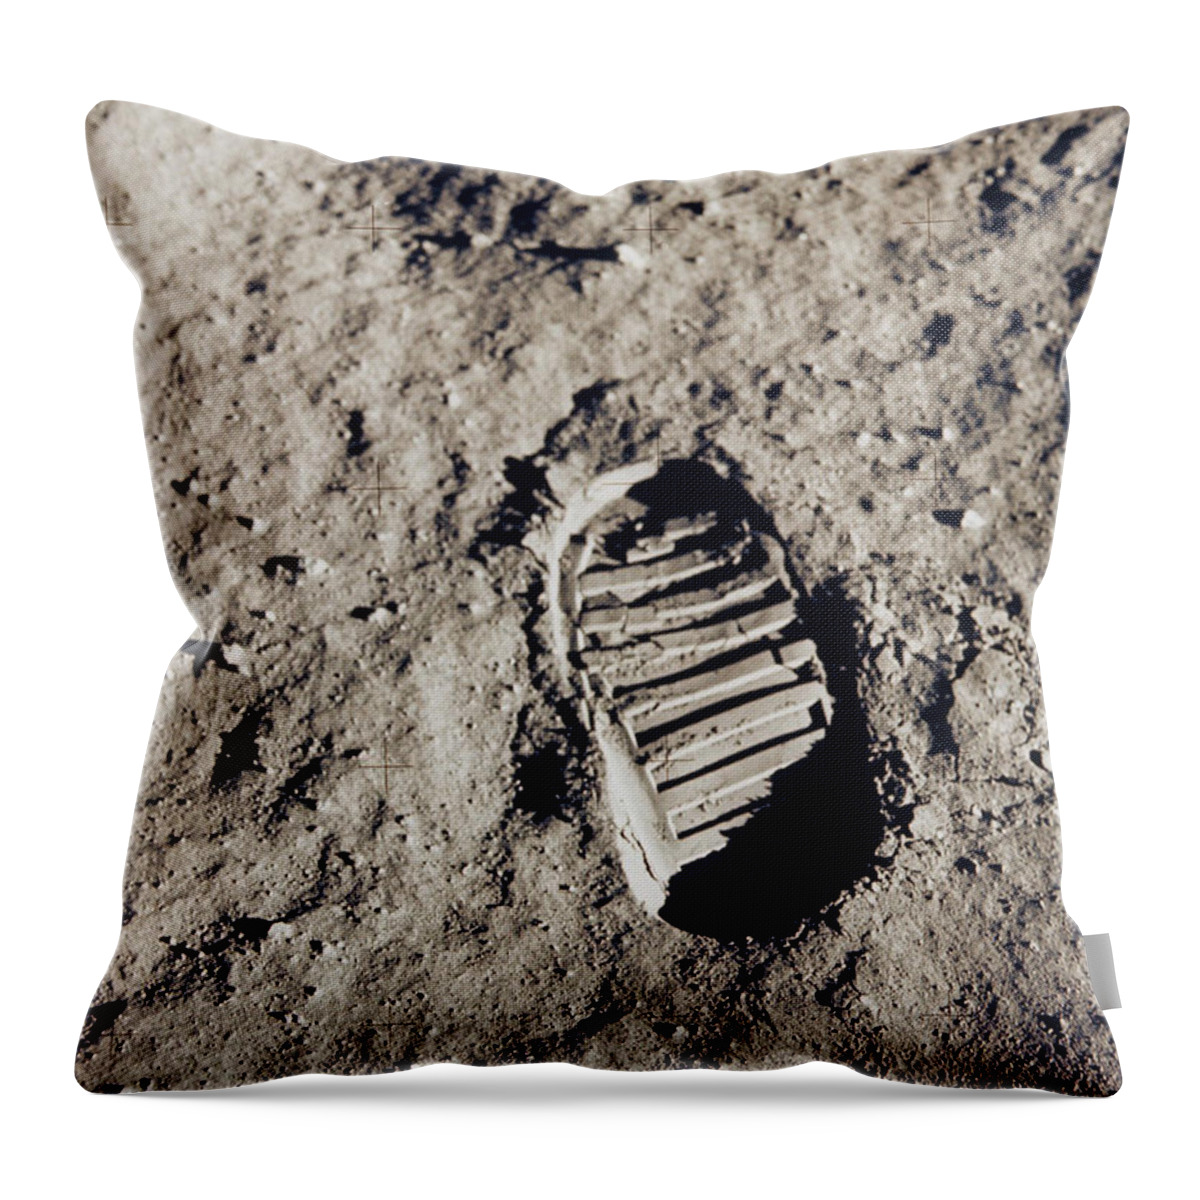 Aldrin Throw Pillow featuring the photograph Footprint On The Moon, 1969 by American School